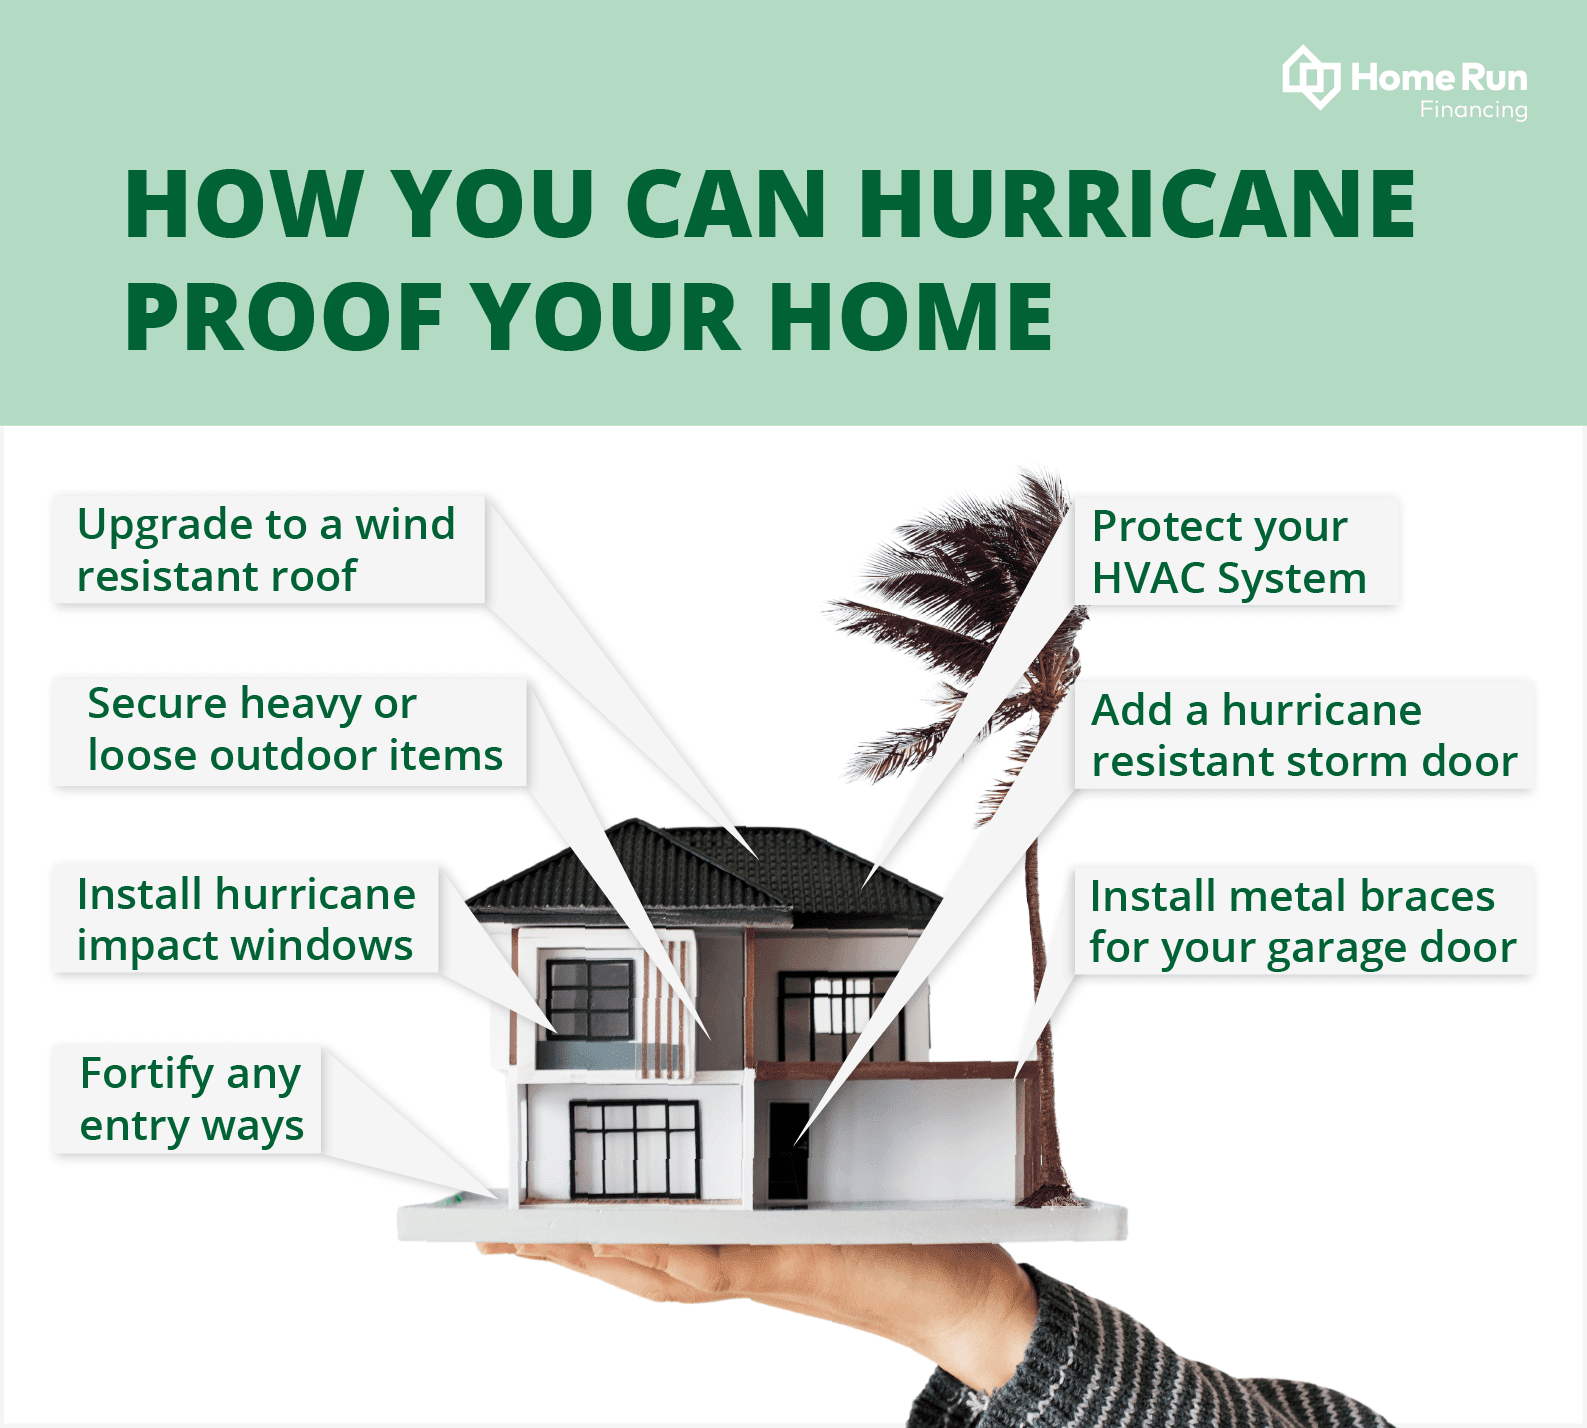 How to Hurricane Proof Your Home | Home Run Financing